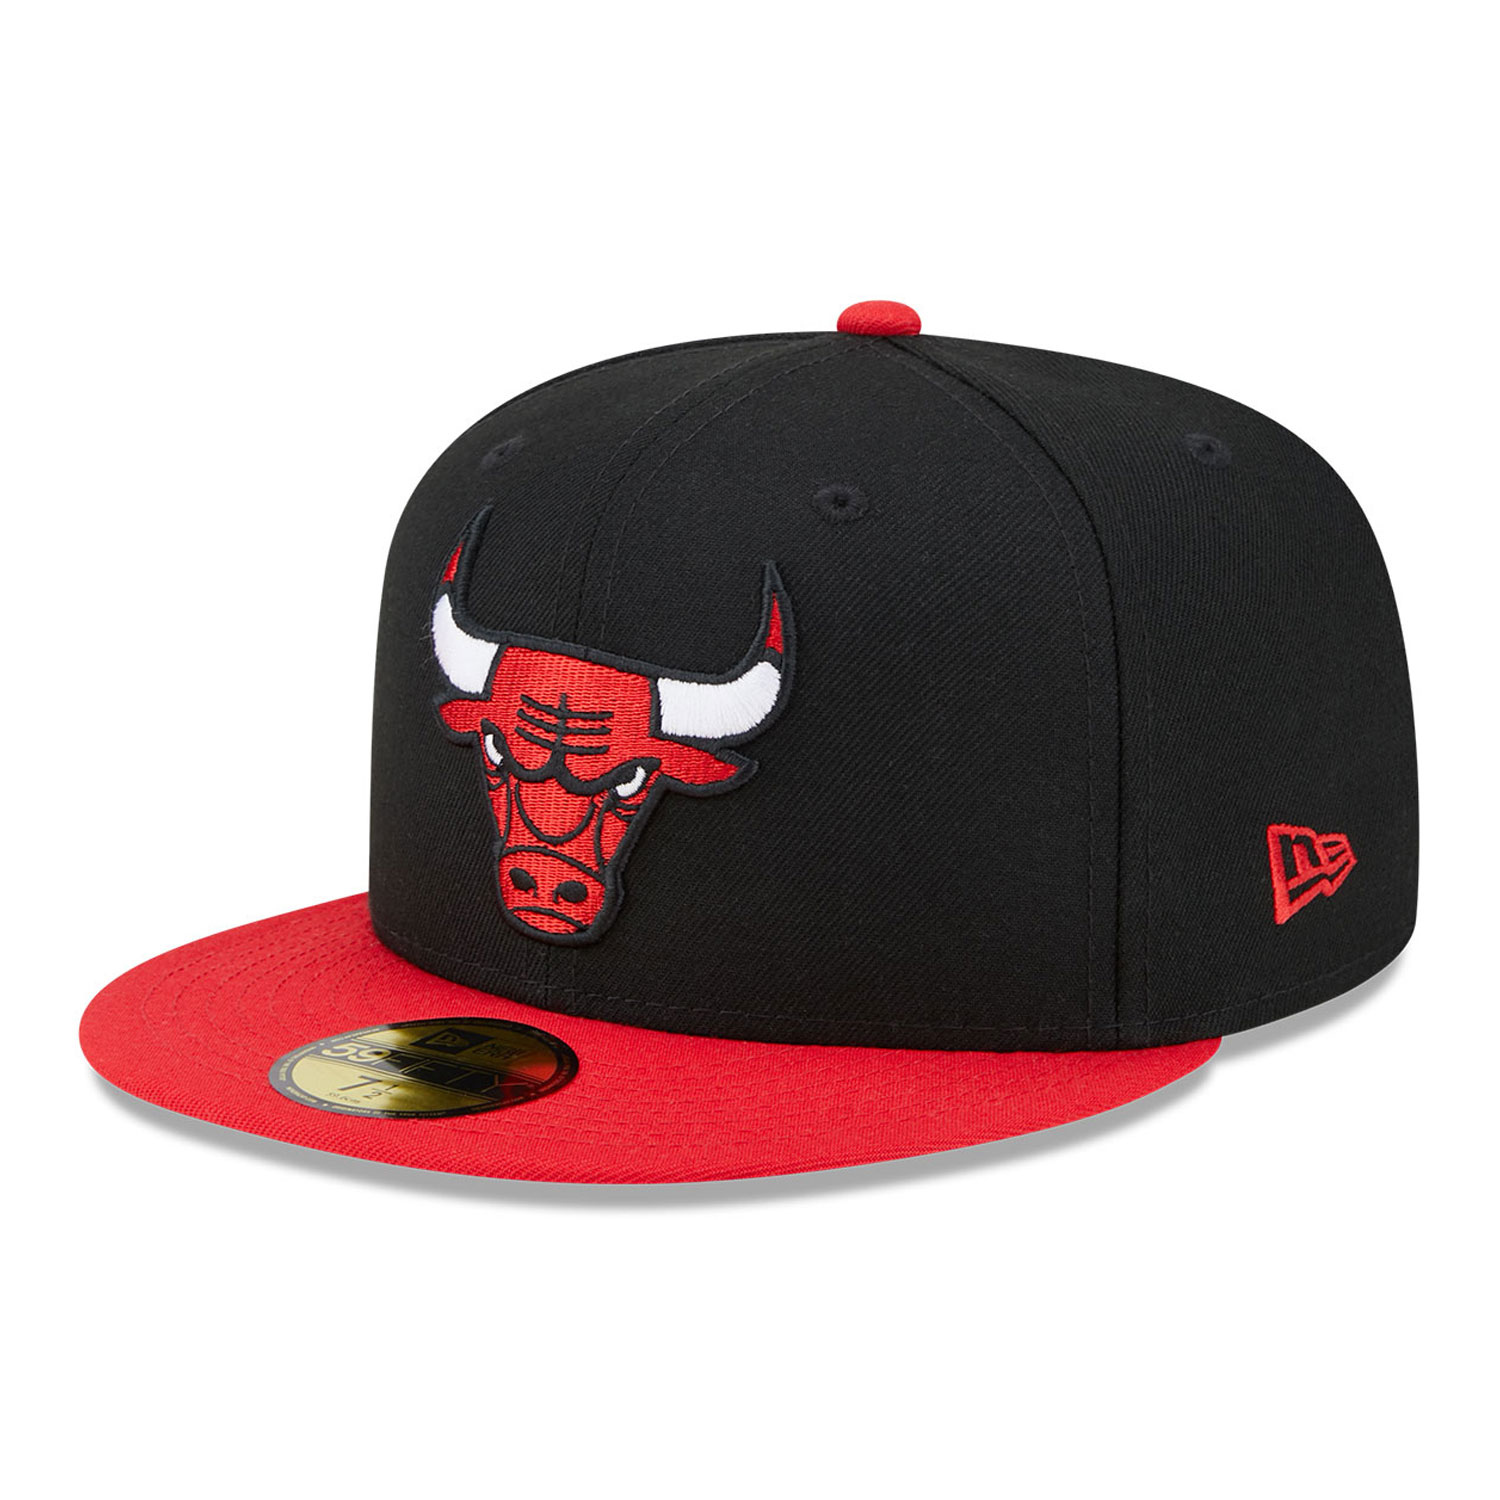 Chicago Bulls NBA All Star Game Black 59FIFTY Fitted Cap